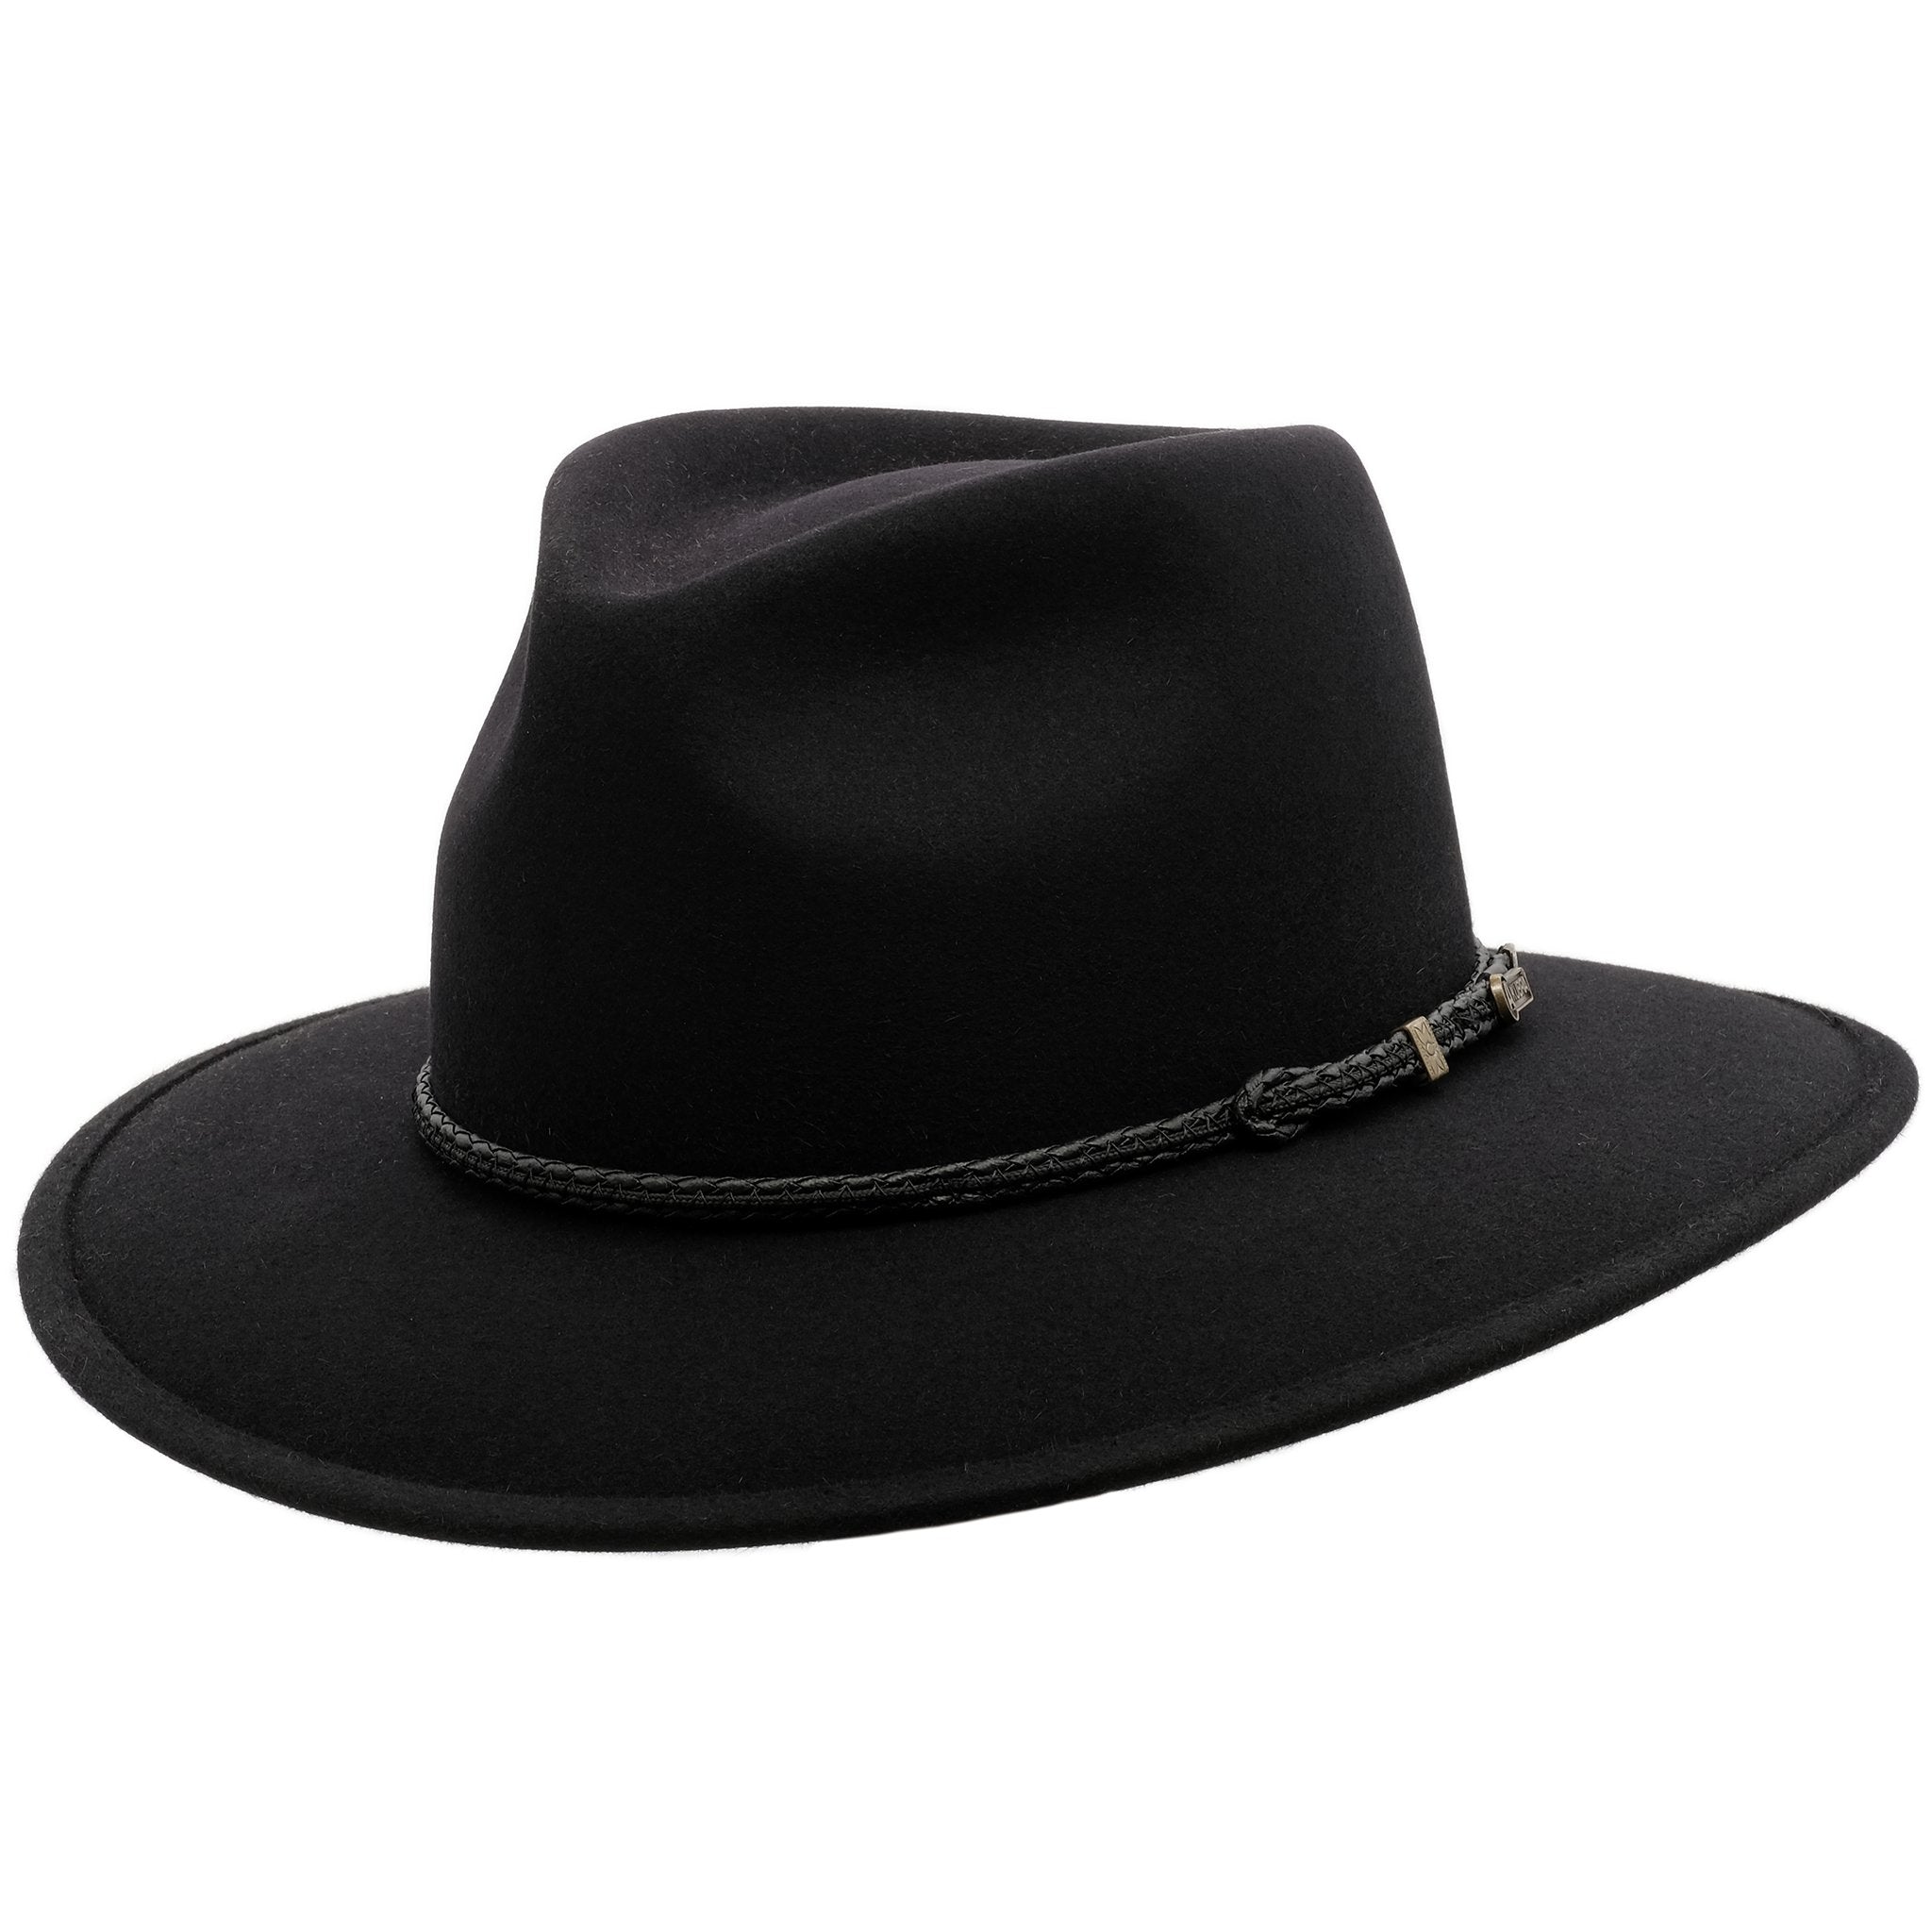 Strand Hatters - Largest range of the iconic Akubra Hats in Sydney